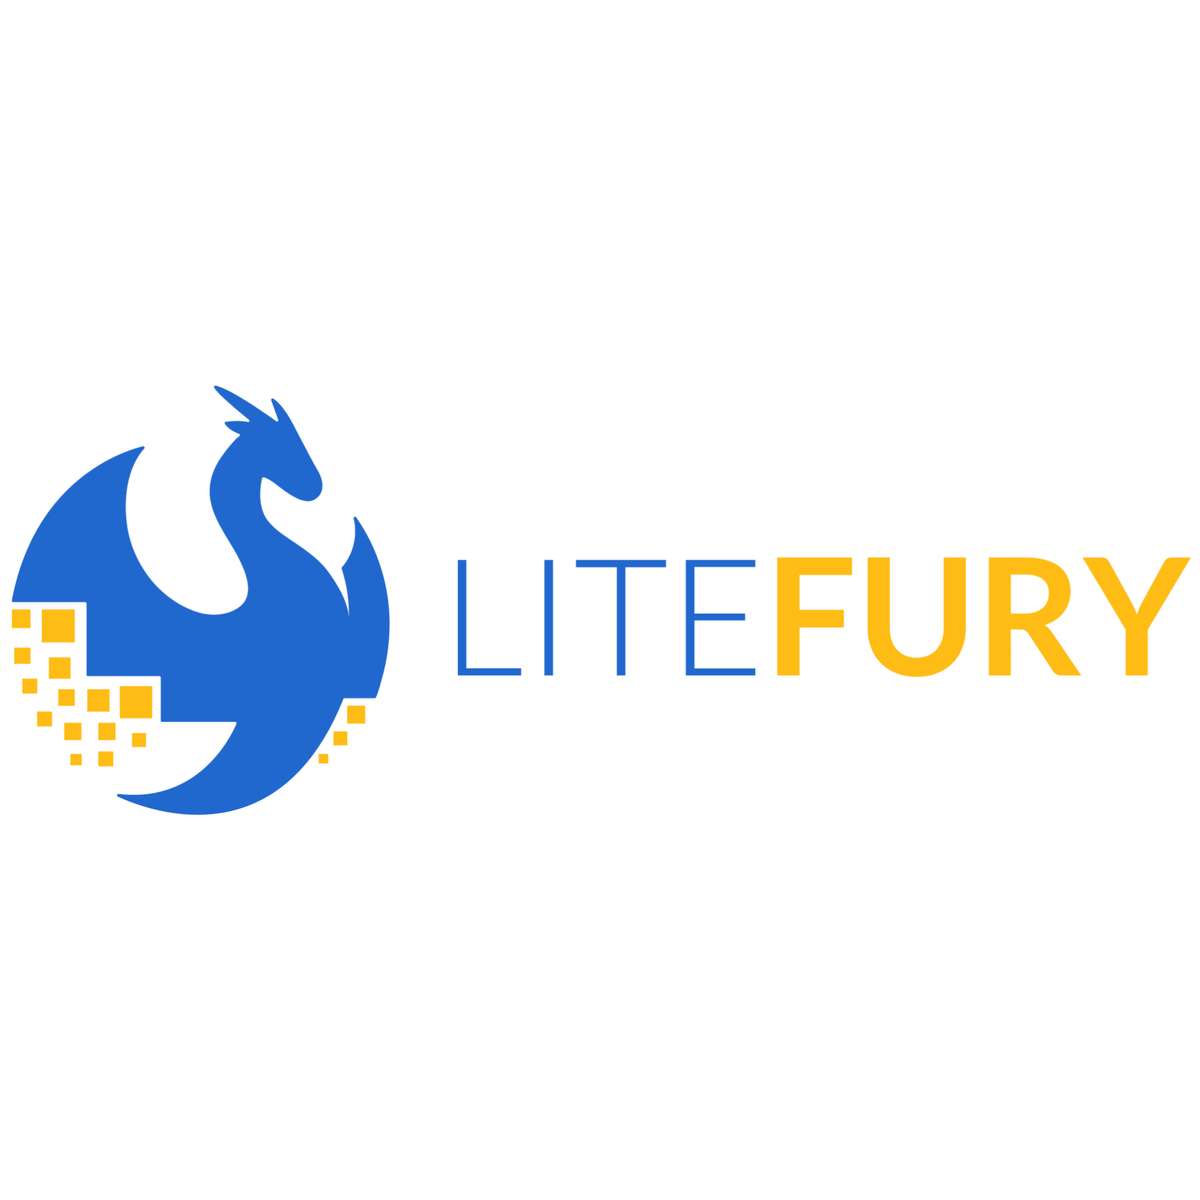 Litefury logo puzzle online from photo